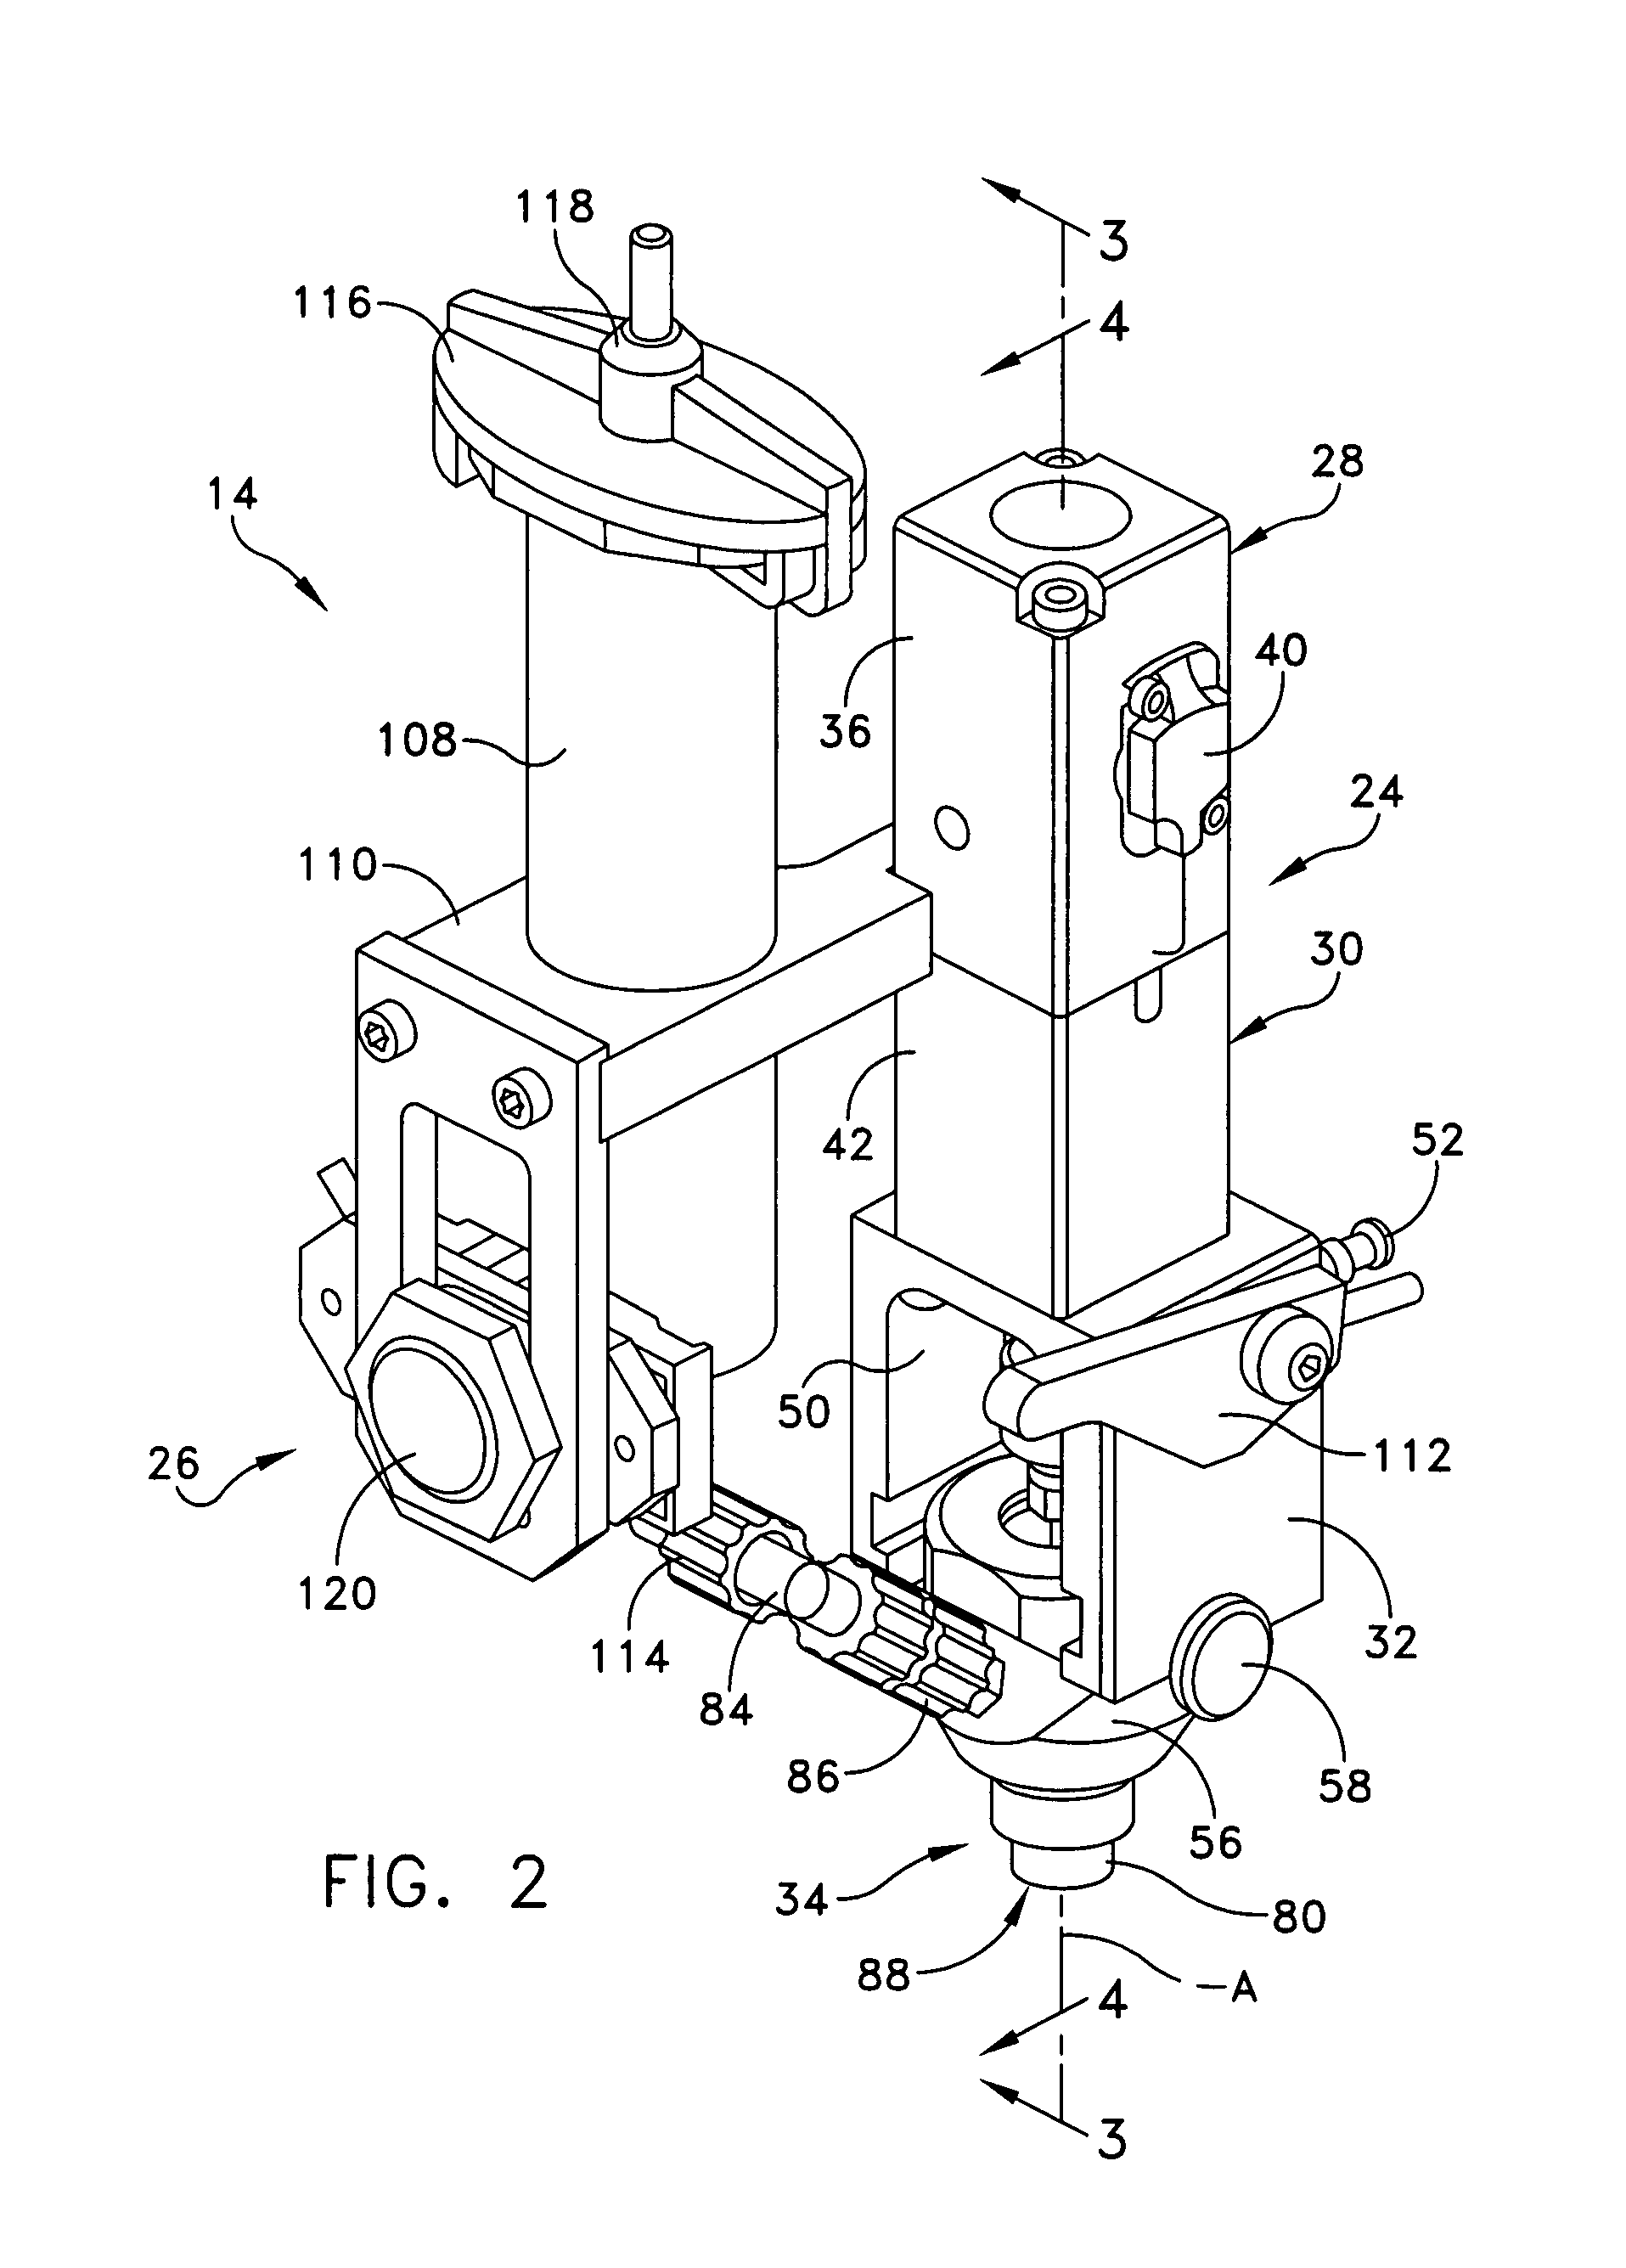 Method and apparatus for dispensing a viscous material on a substrate